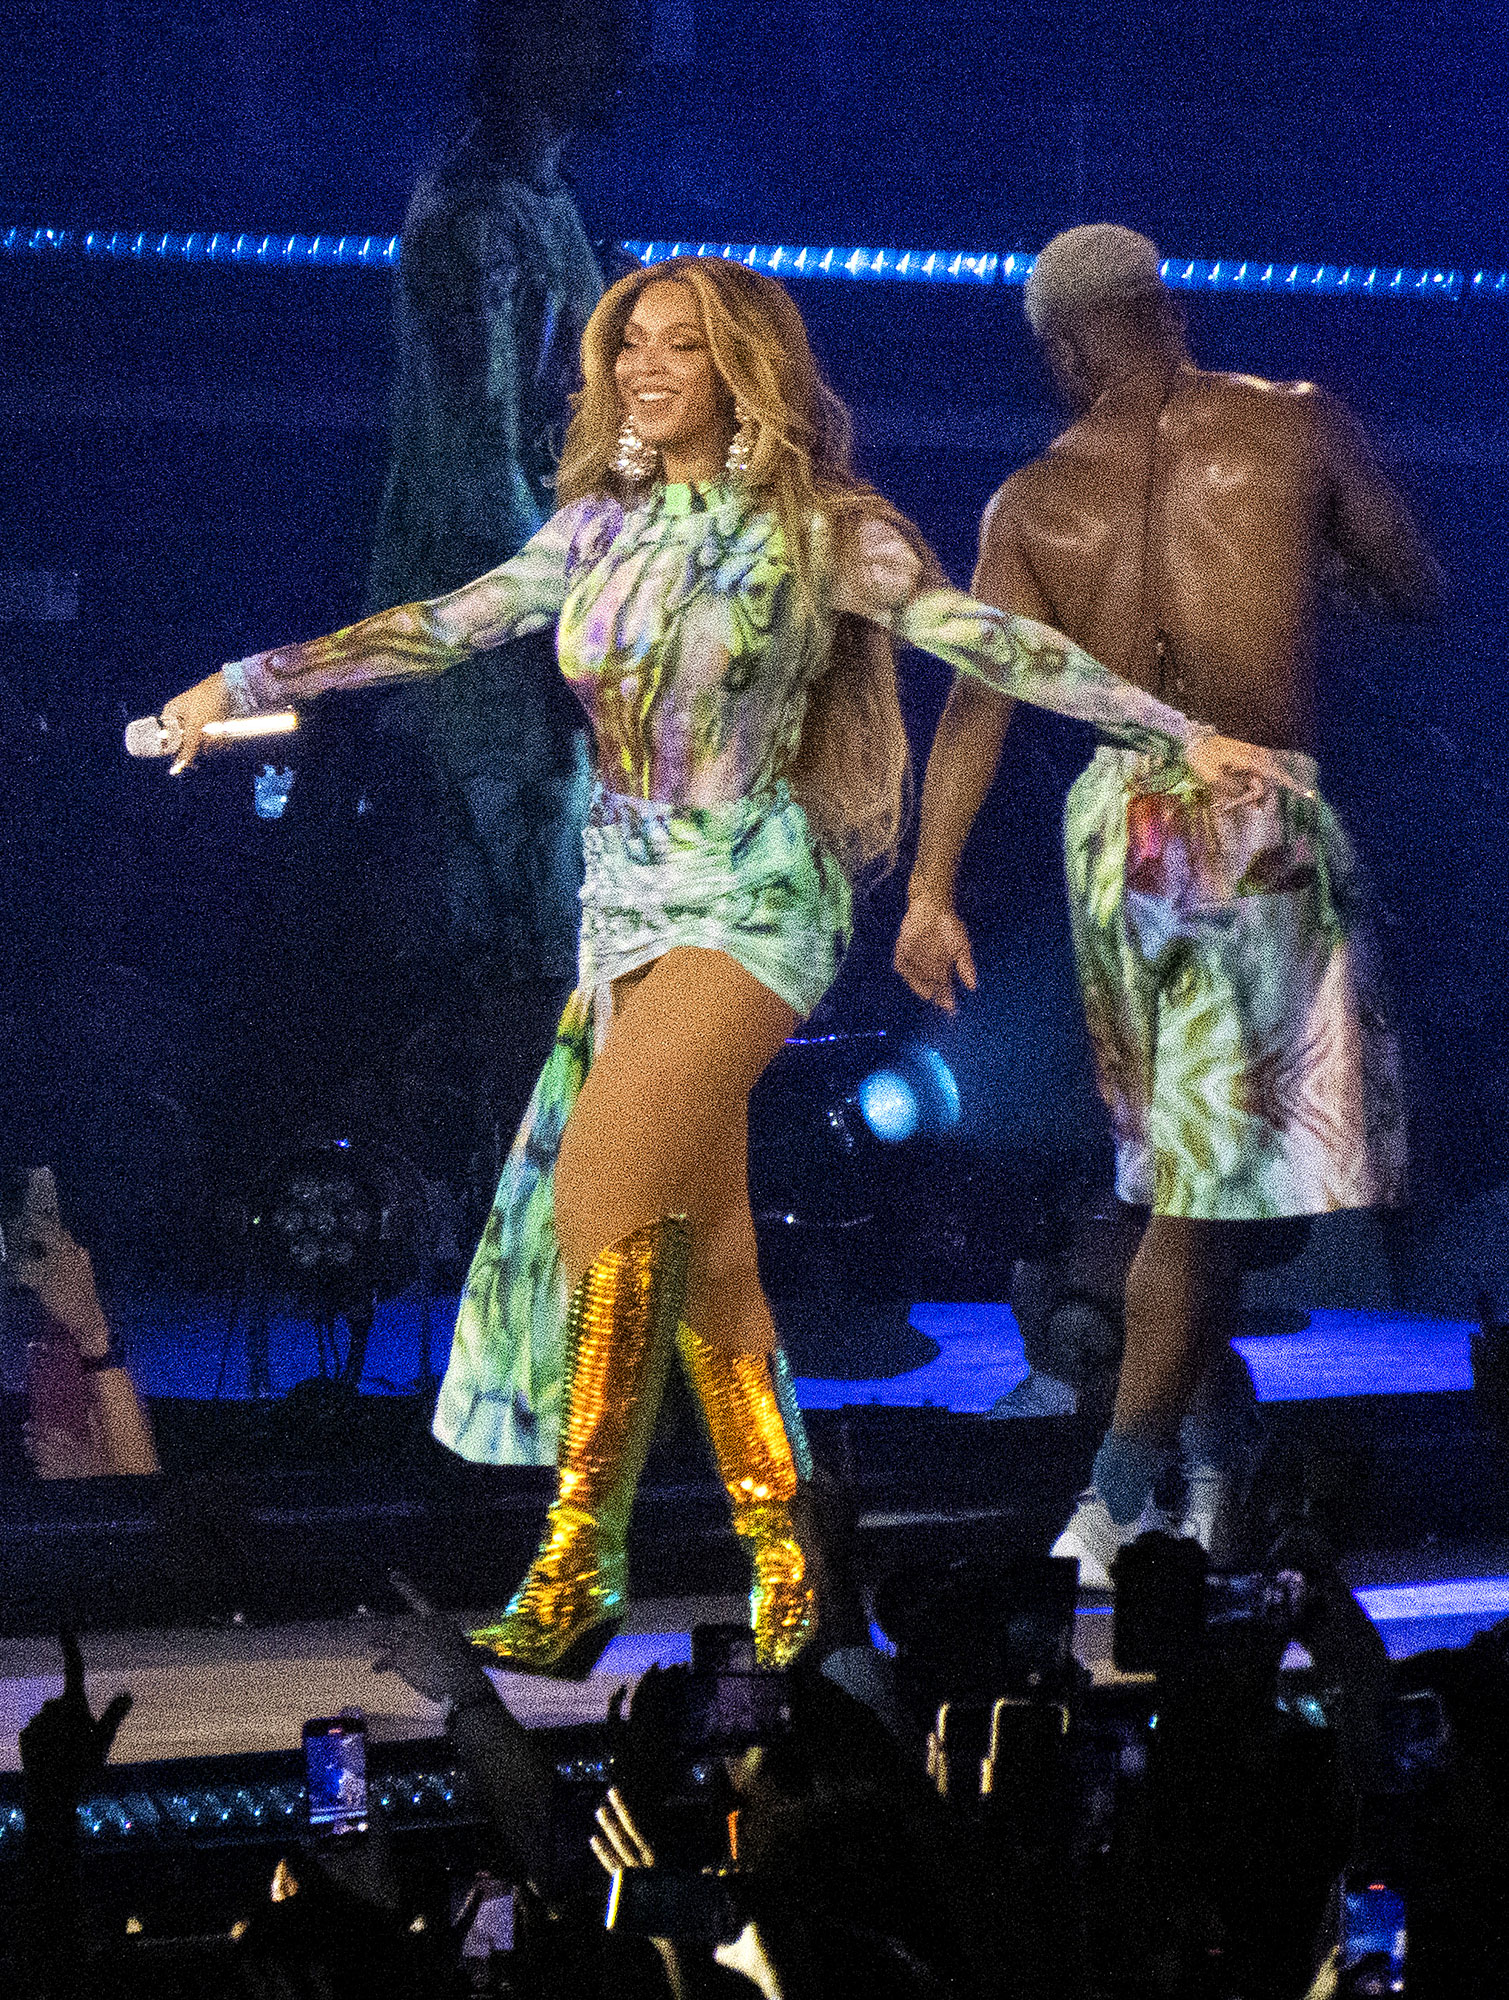 Beyoncé's Renaissance World Tour: All the looks from the first